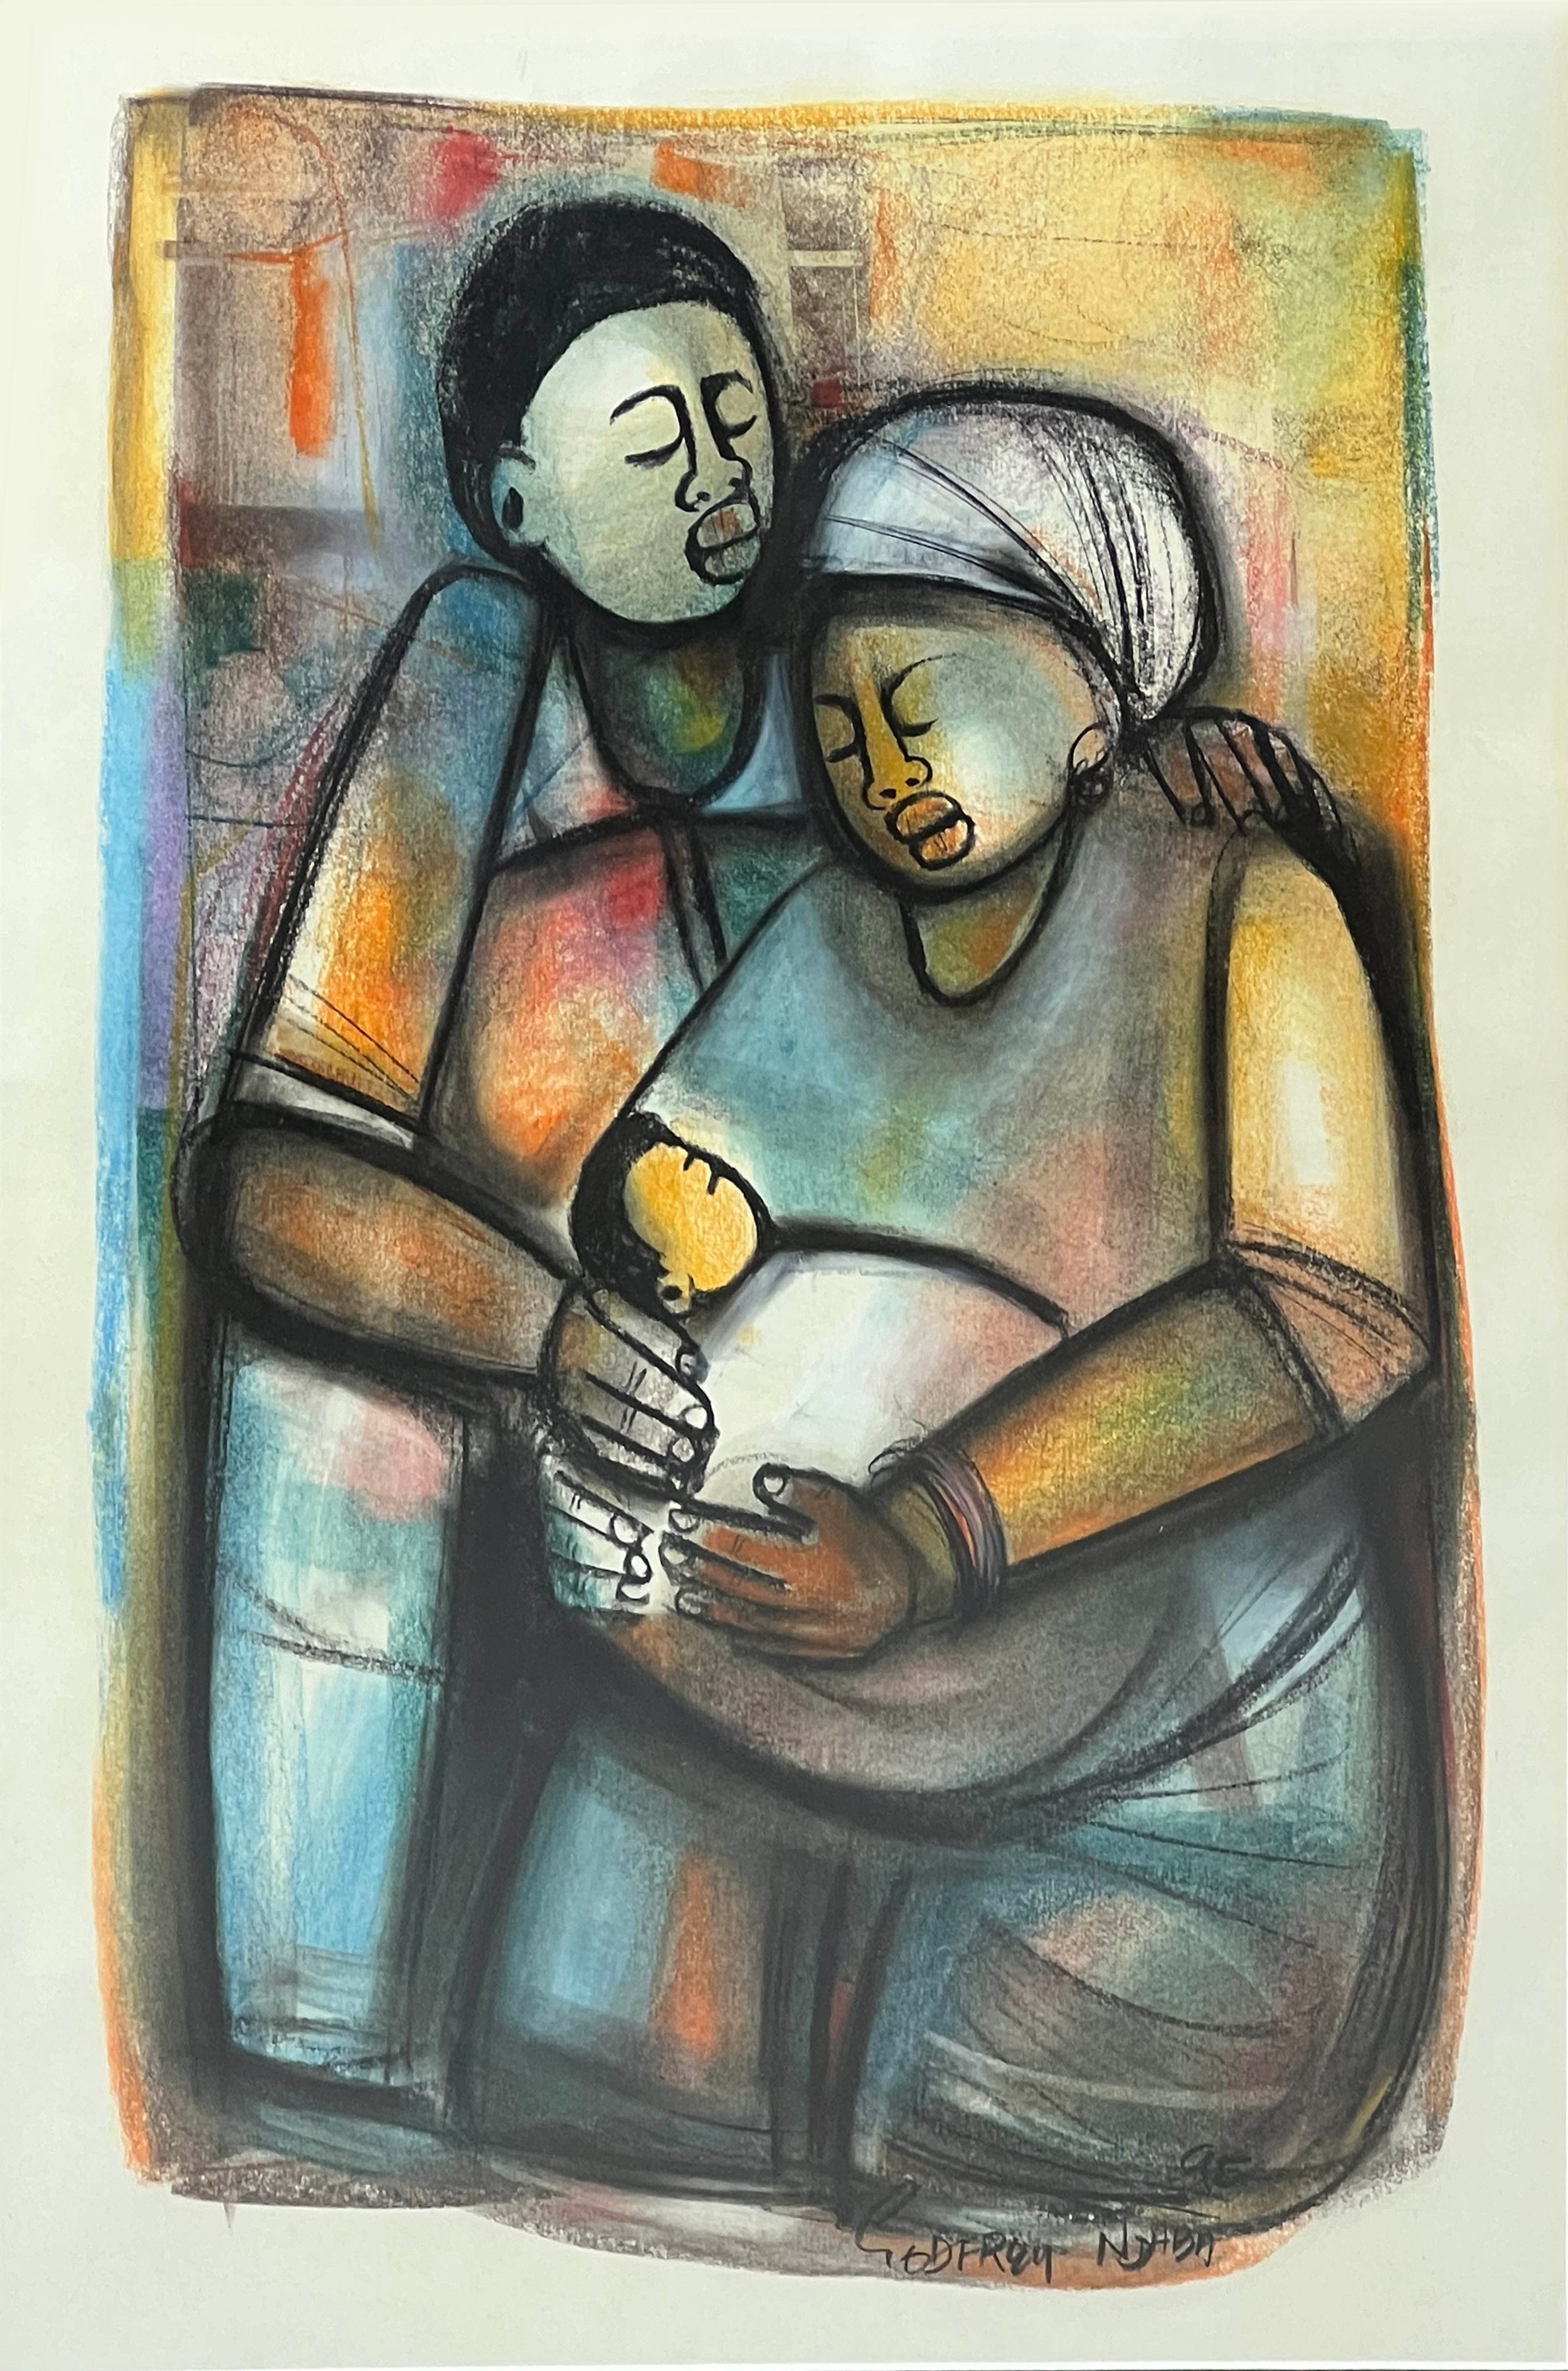 GODFREY NDABA (born 1947, South Africa) 'Family', crayon and water colour, 53cm x 40cm, signed and - Image 2 of 3